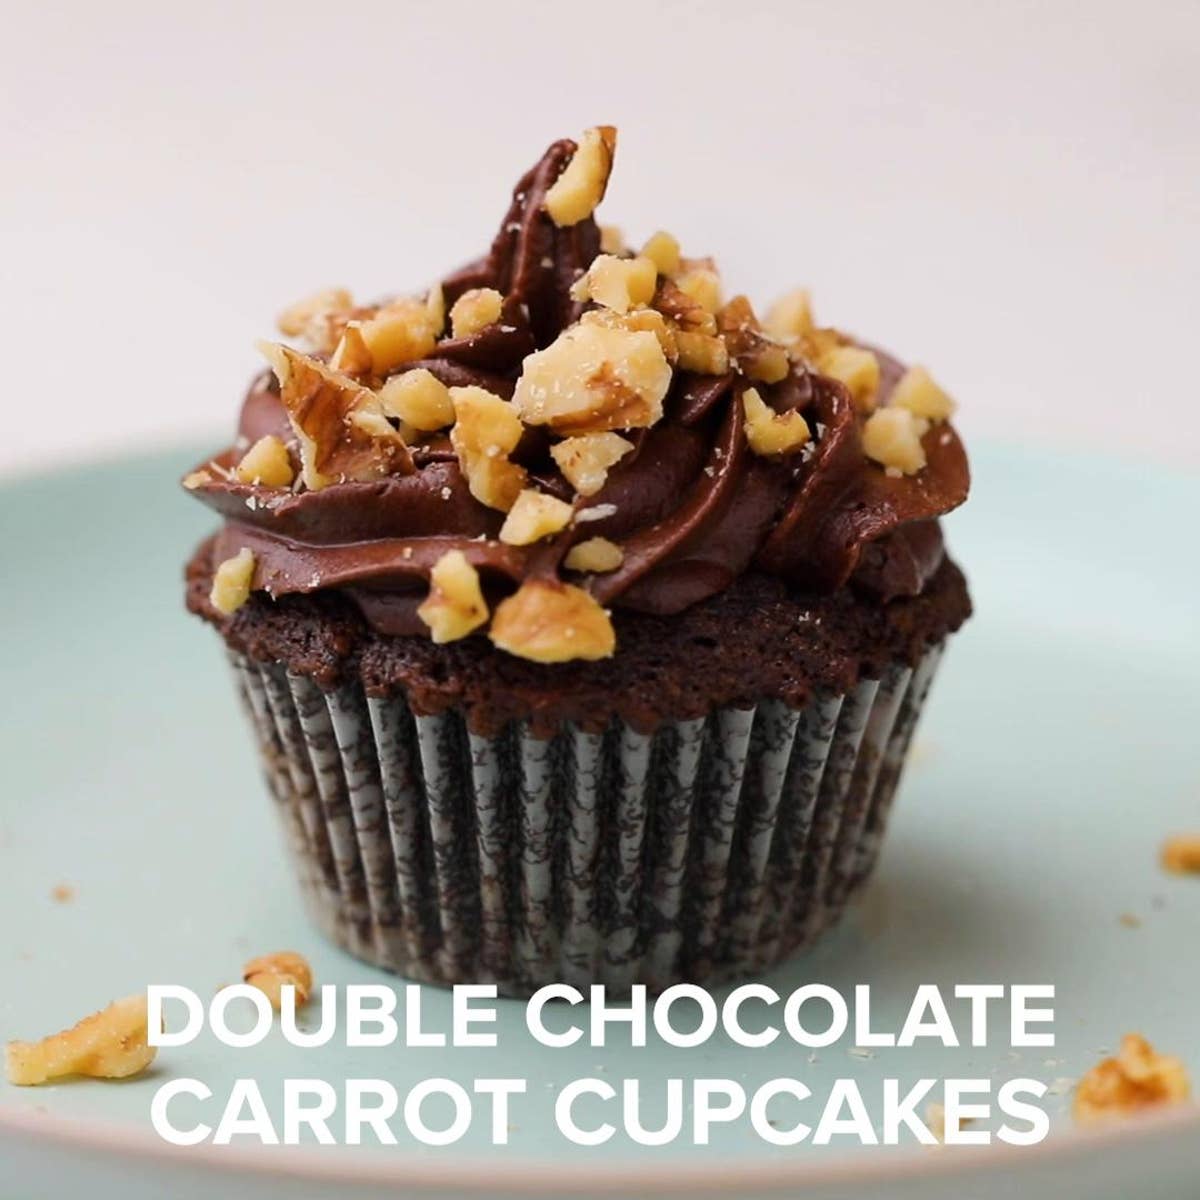 Double Chocolate Carrot Cupcakes